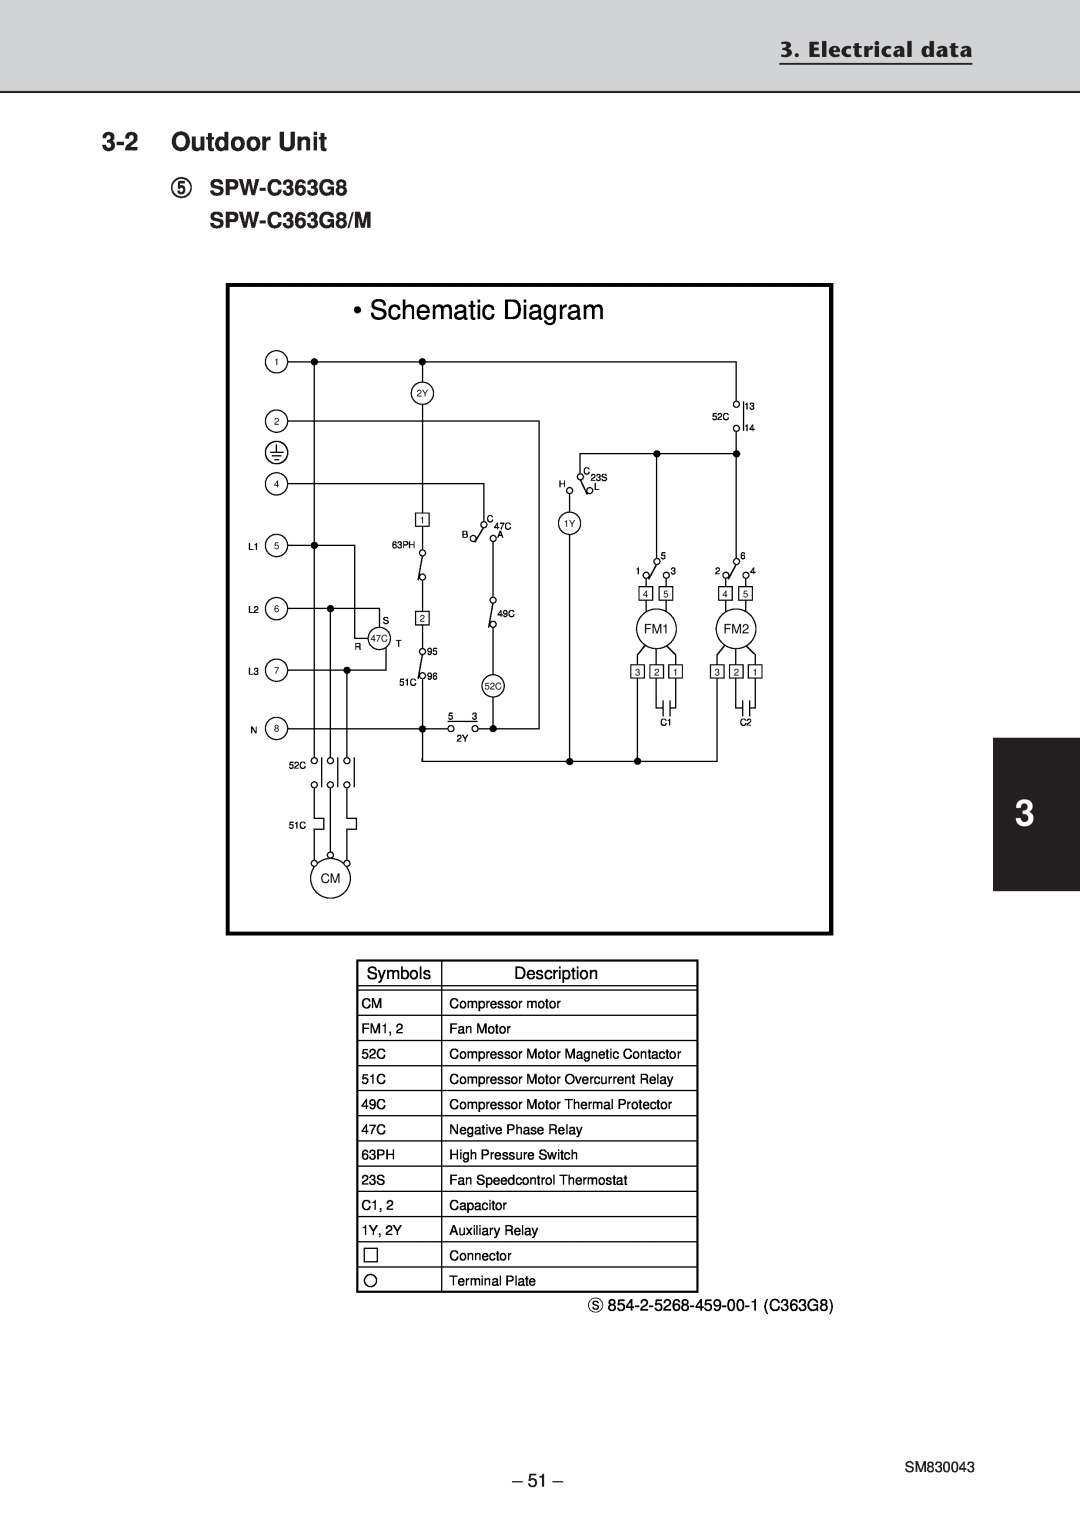 Sanyo SPW-T363GS56, SPW-T483G56, SPW-T483GS56 Schematic Diagram, 3-2Outdoor Unit, Electrical data, SPW-C363G8/M 